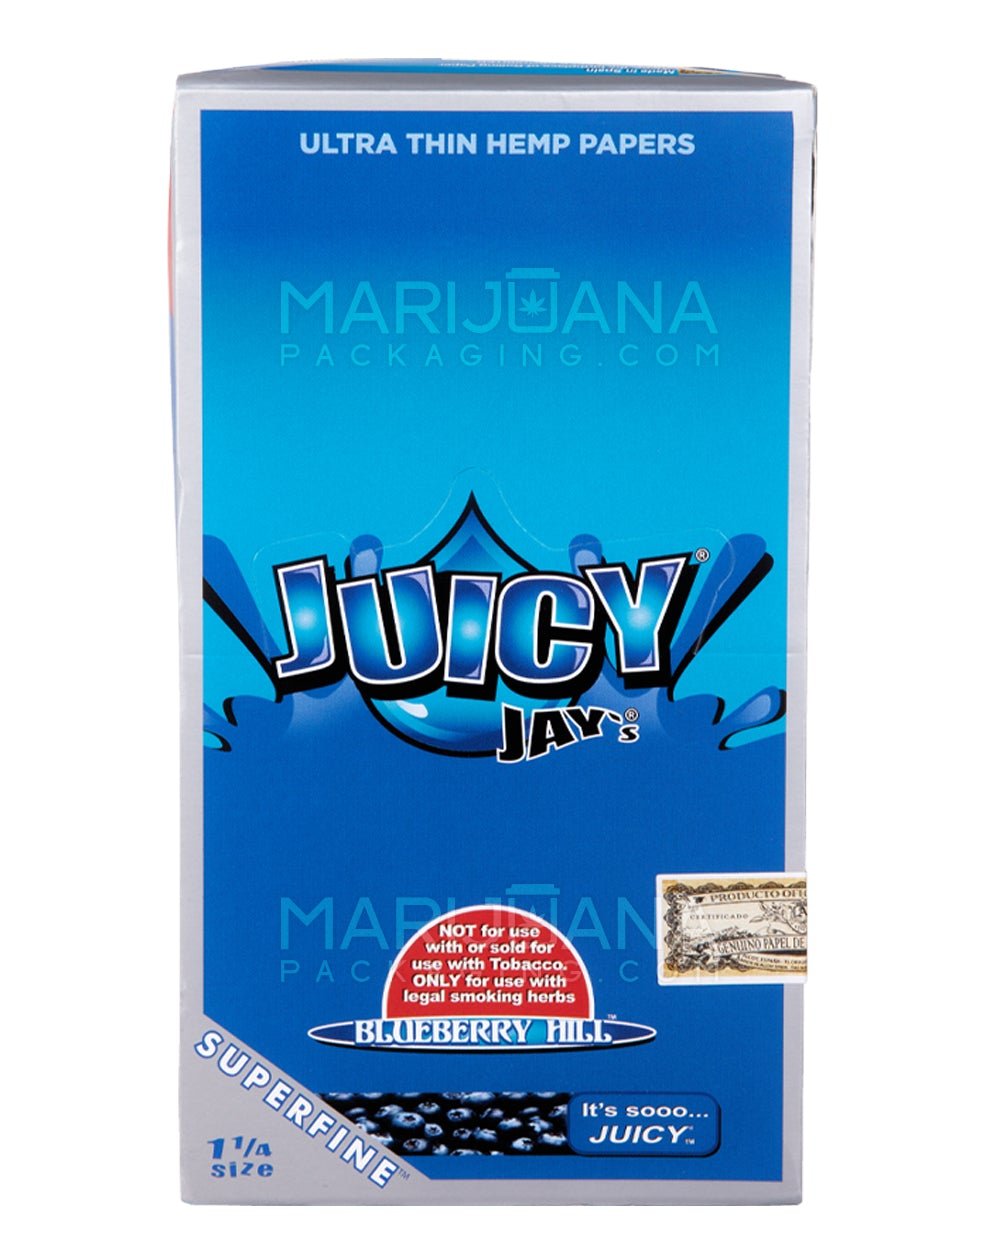 JUICY JAY'S | 'Retail Display' 1 1/4 Size Hemp Rolling Papers | 76mm - Blueberry - 24 Count - 2